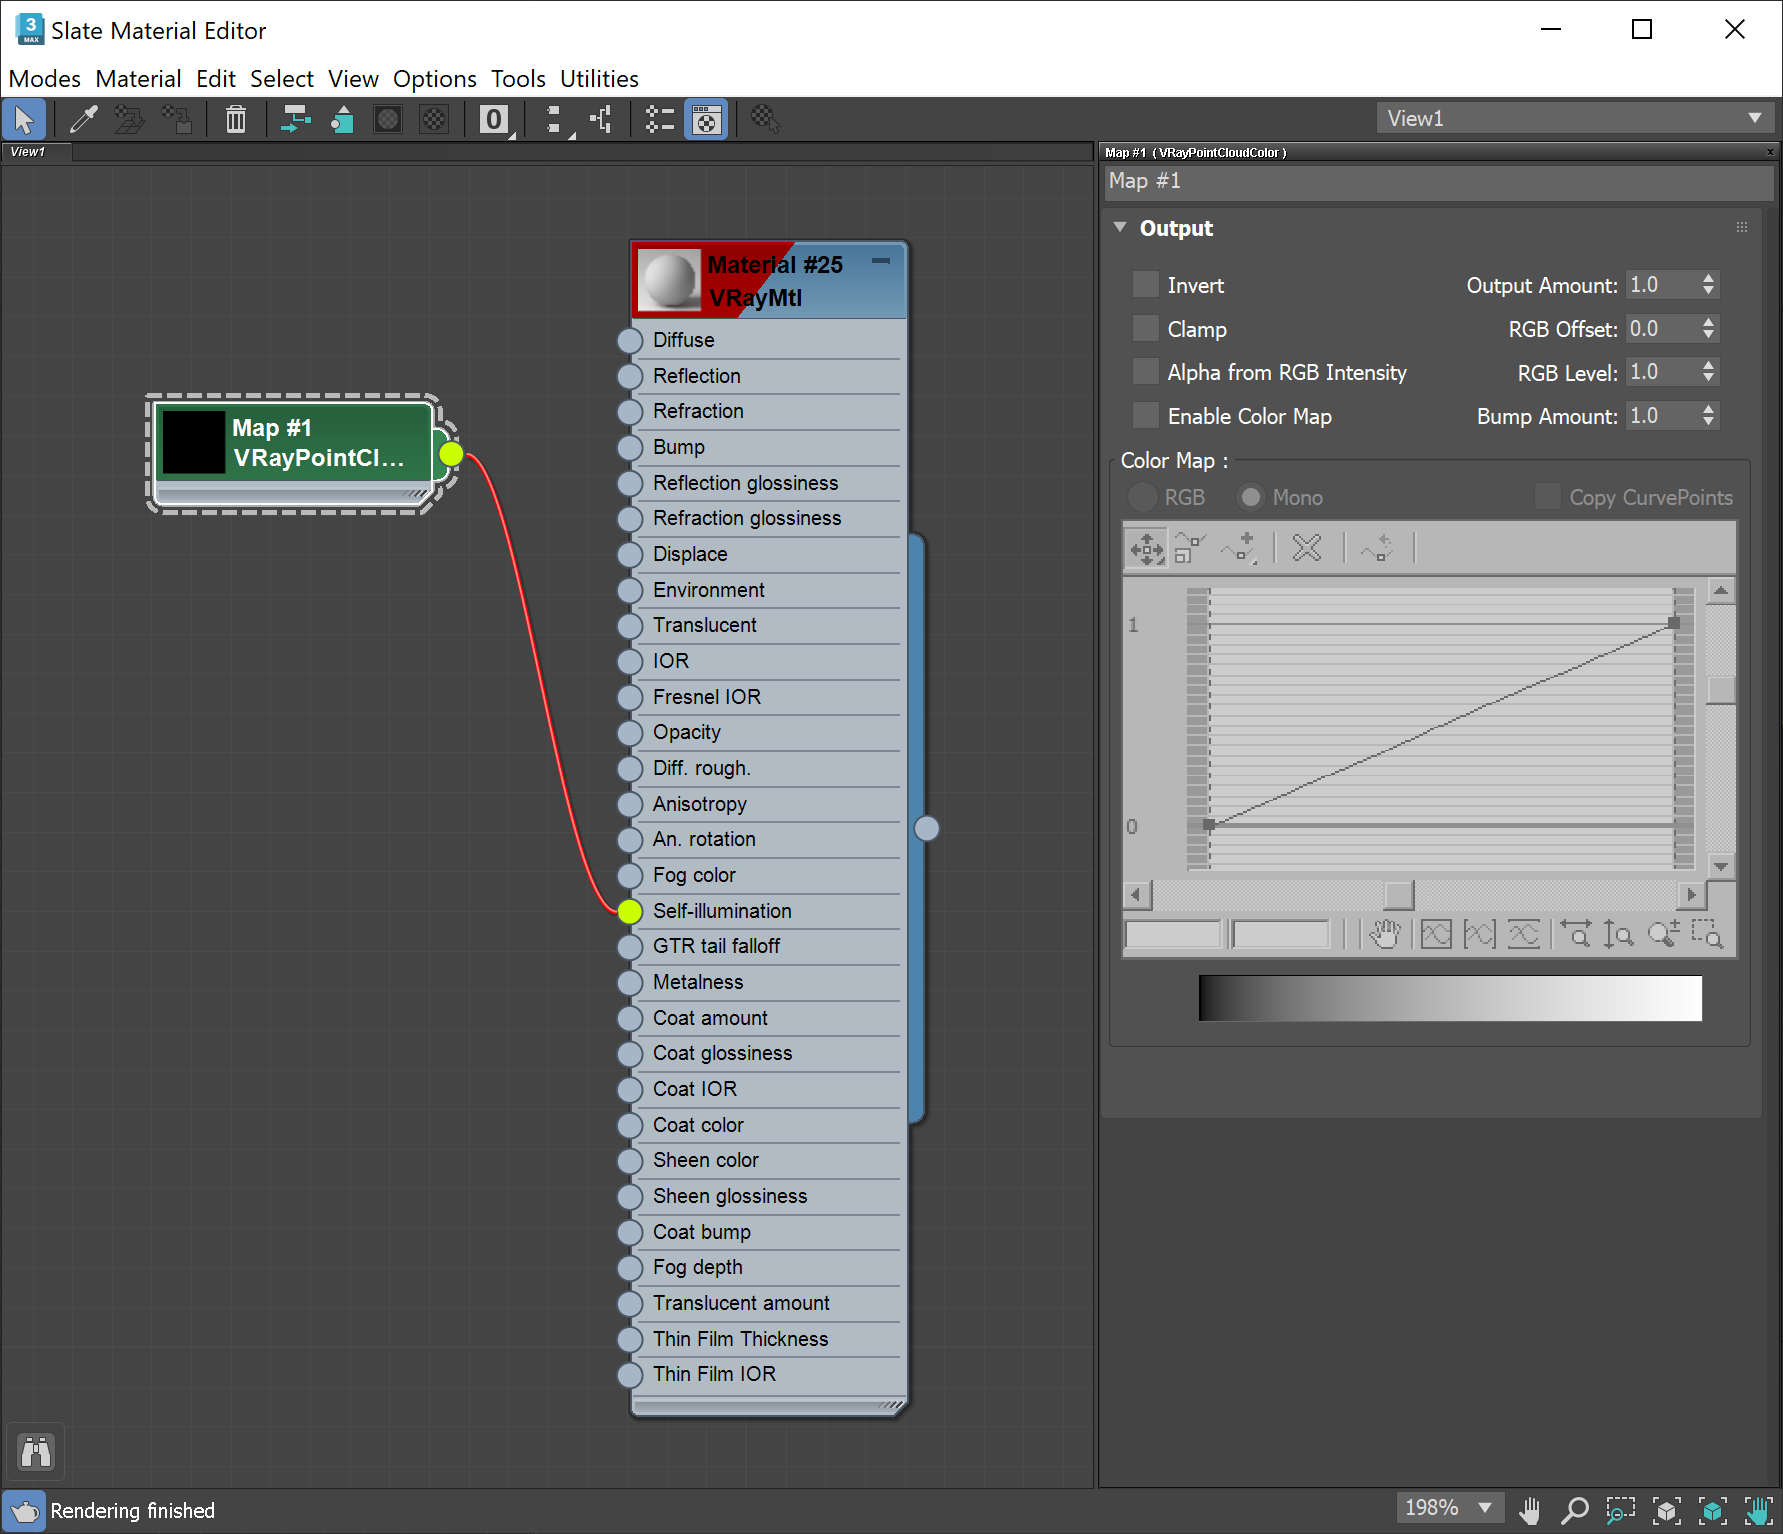 VRayPointCloudColor - V-Ray 3ds Max - Help